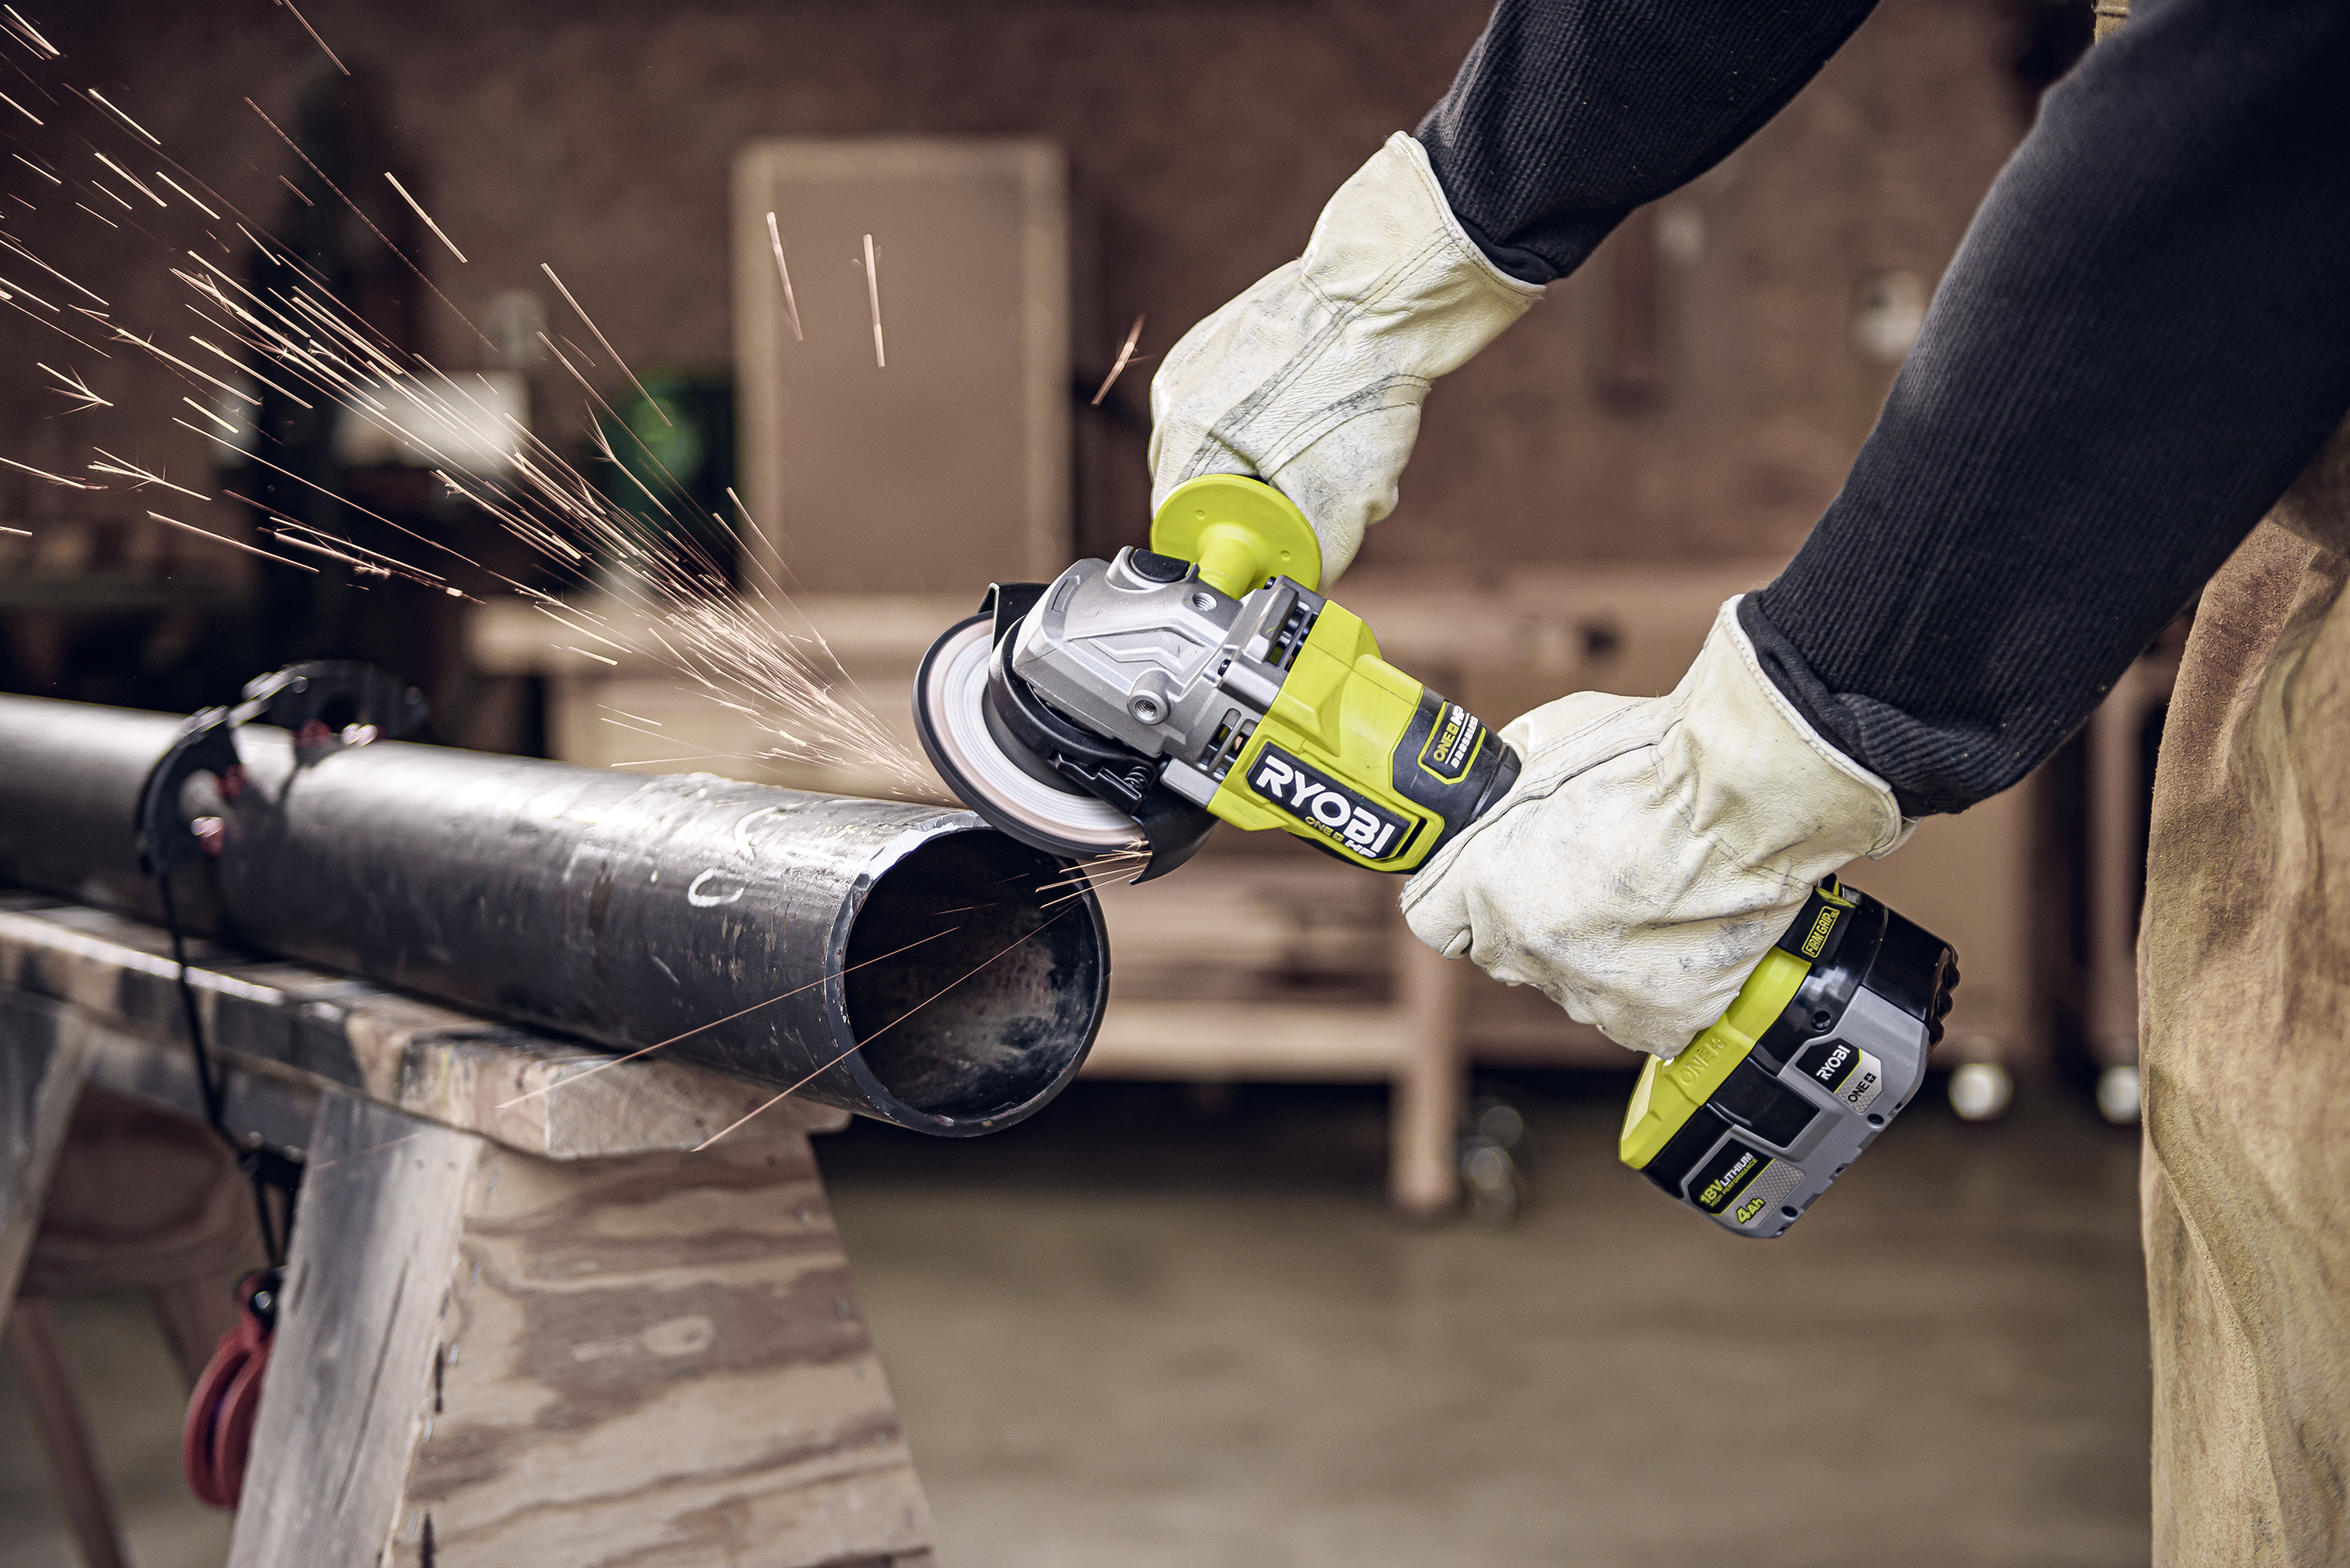 Firm Grip Impact Gloves - Tools In Action - Power Tool Reviews